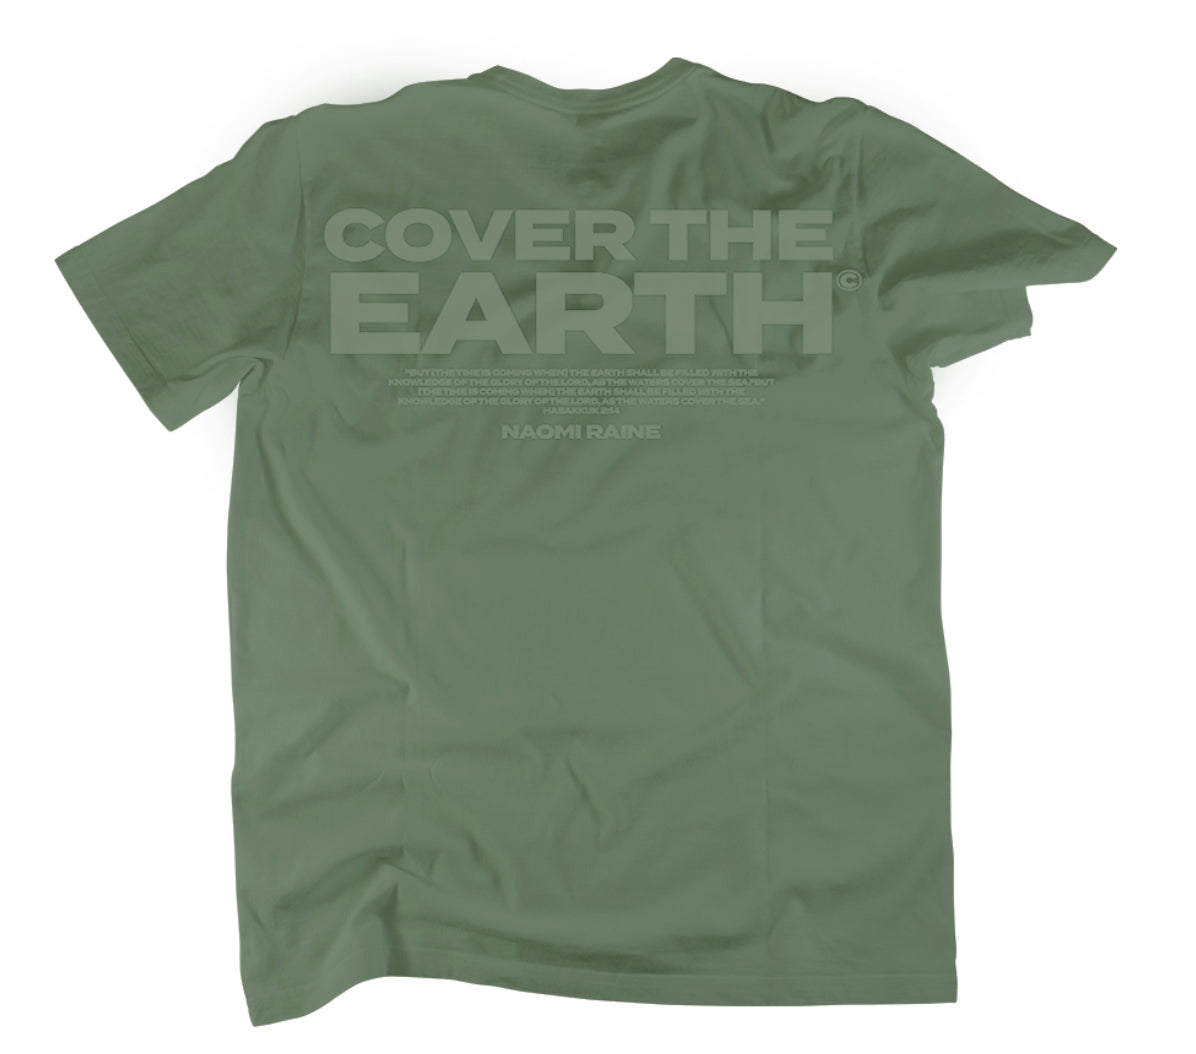 COVER THE EARTH monochrome olive T-Shirt and puff logo